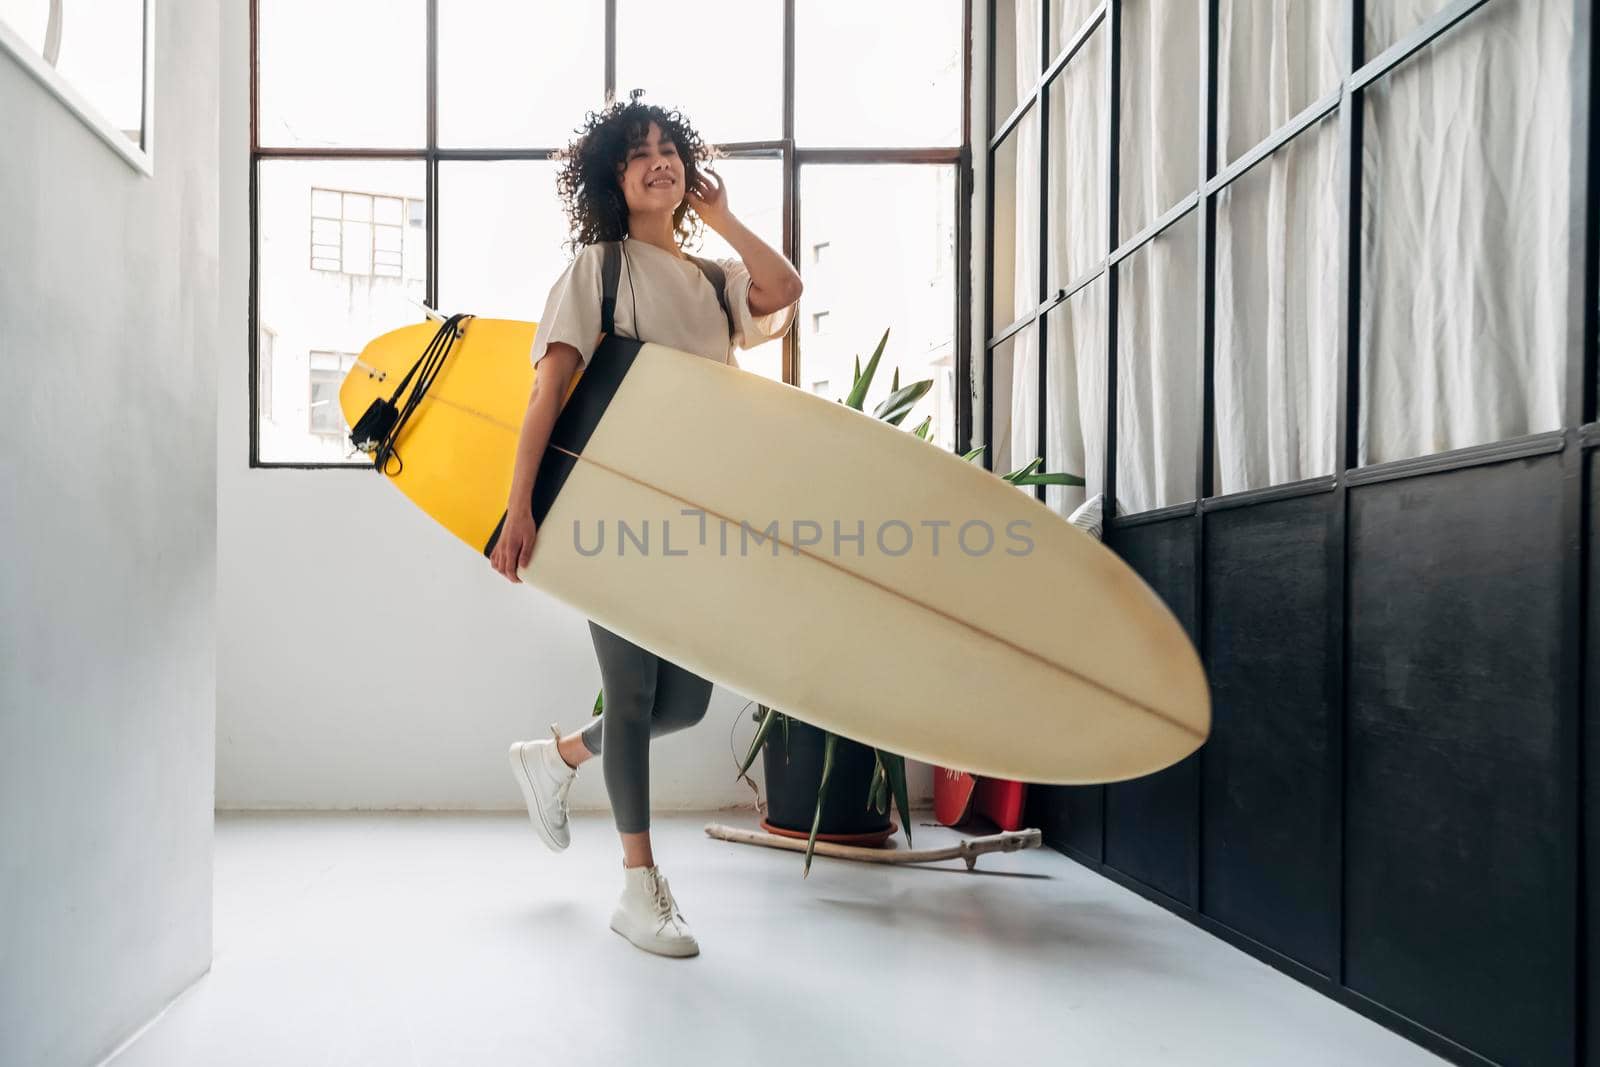 Smiling young mixed race woman arrives home listening to music and carrying a surf board after a day of surfing. by Hoverstock